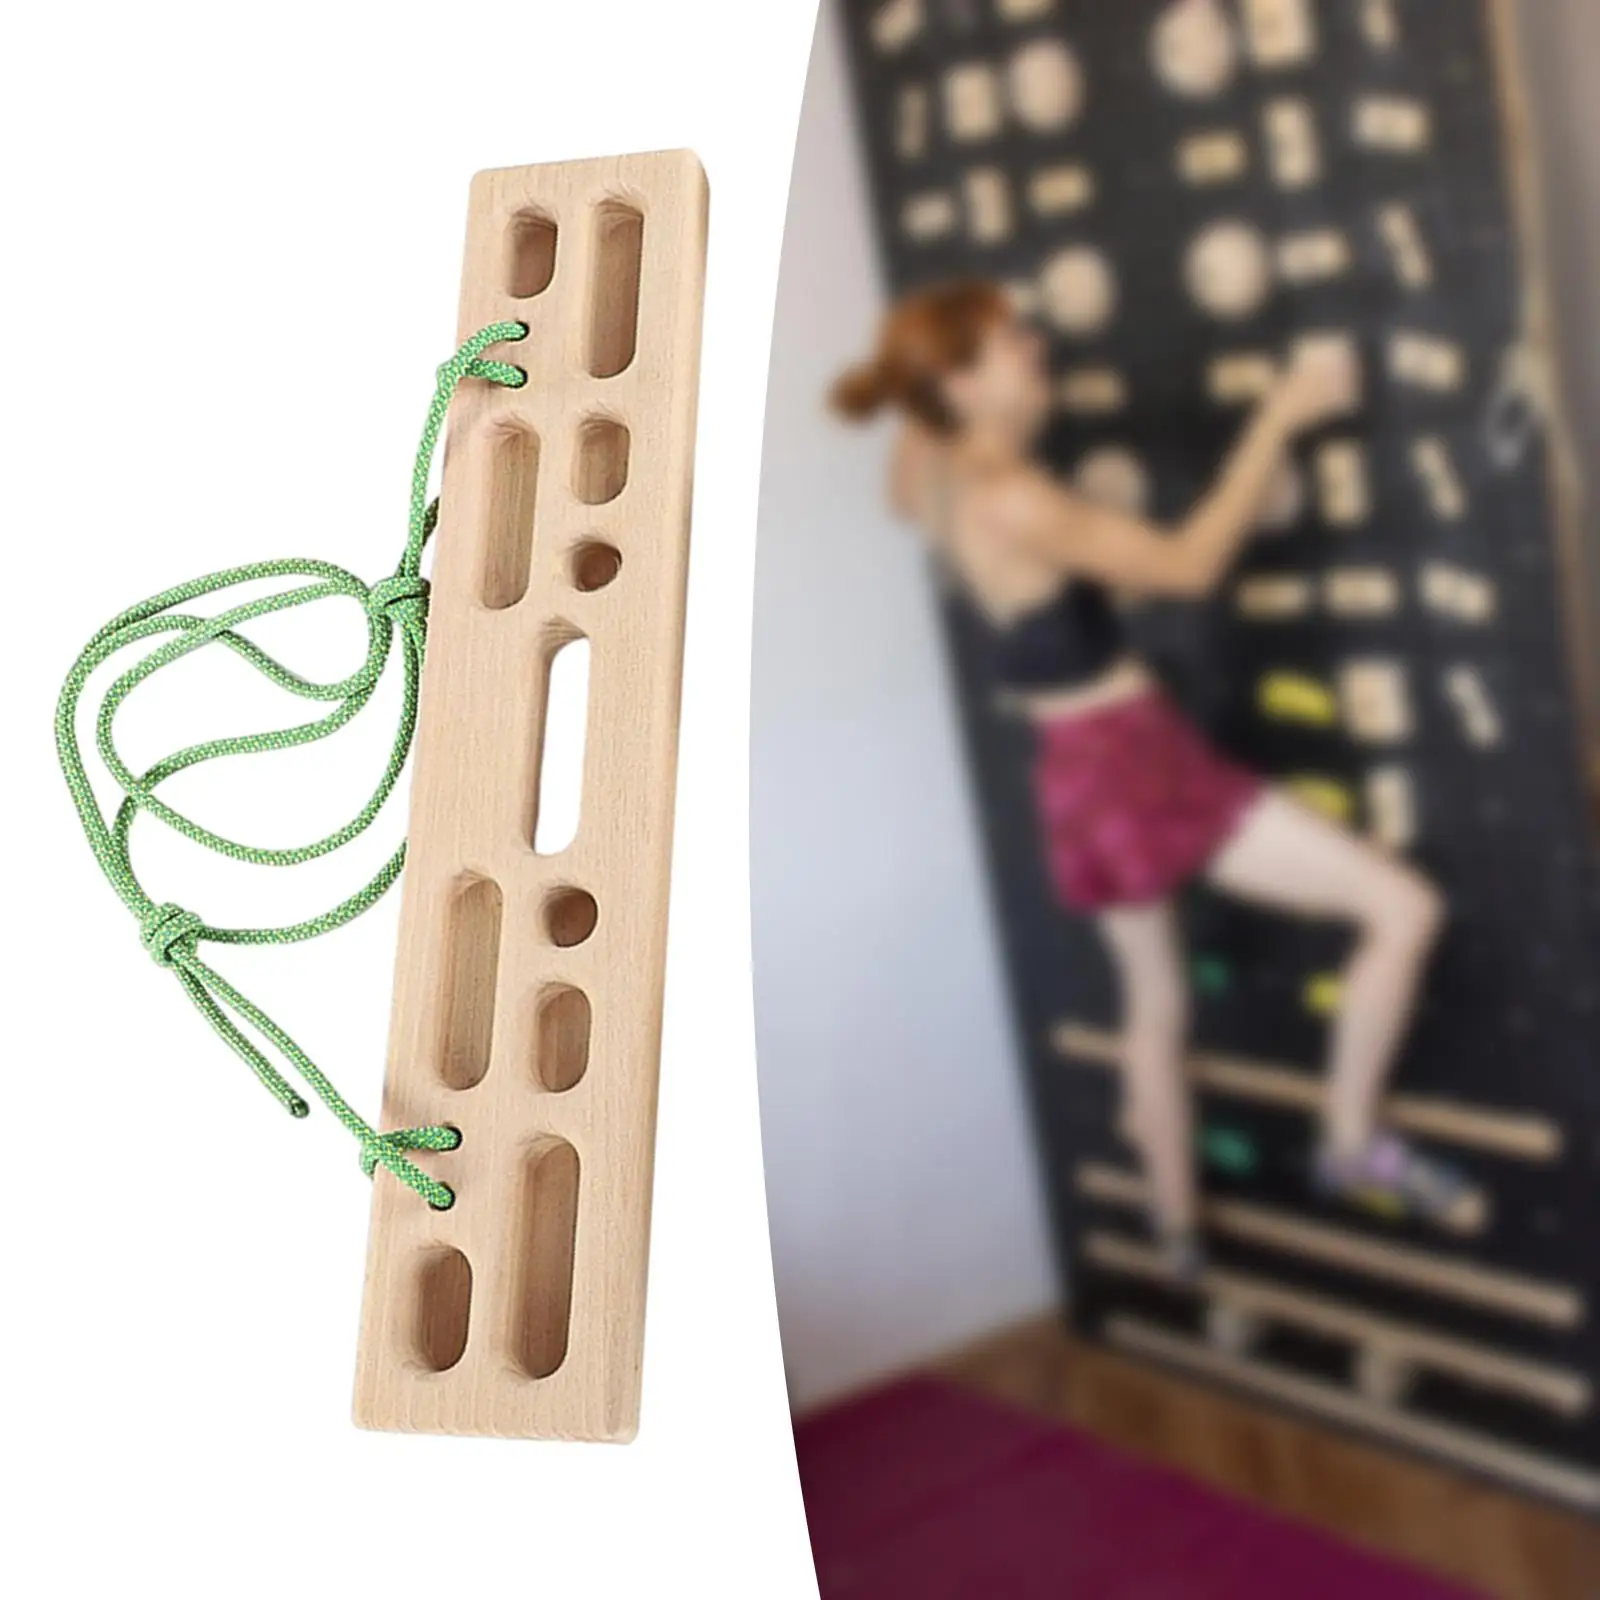 Climbing Hangboard Climbing Fingerboard Training Board Strength Trainer Pull up Board for Wall Bouldering Door Athletes Outdoor